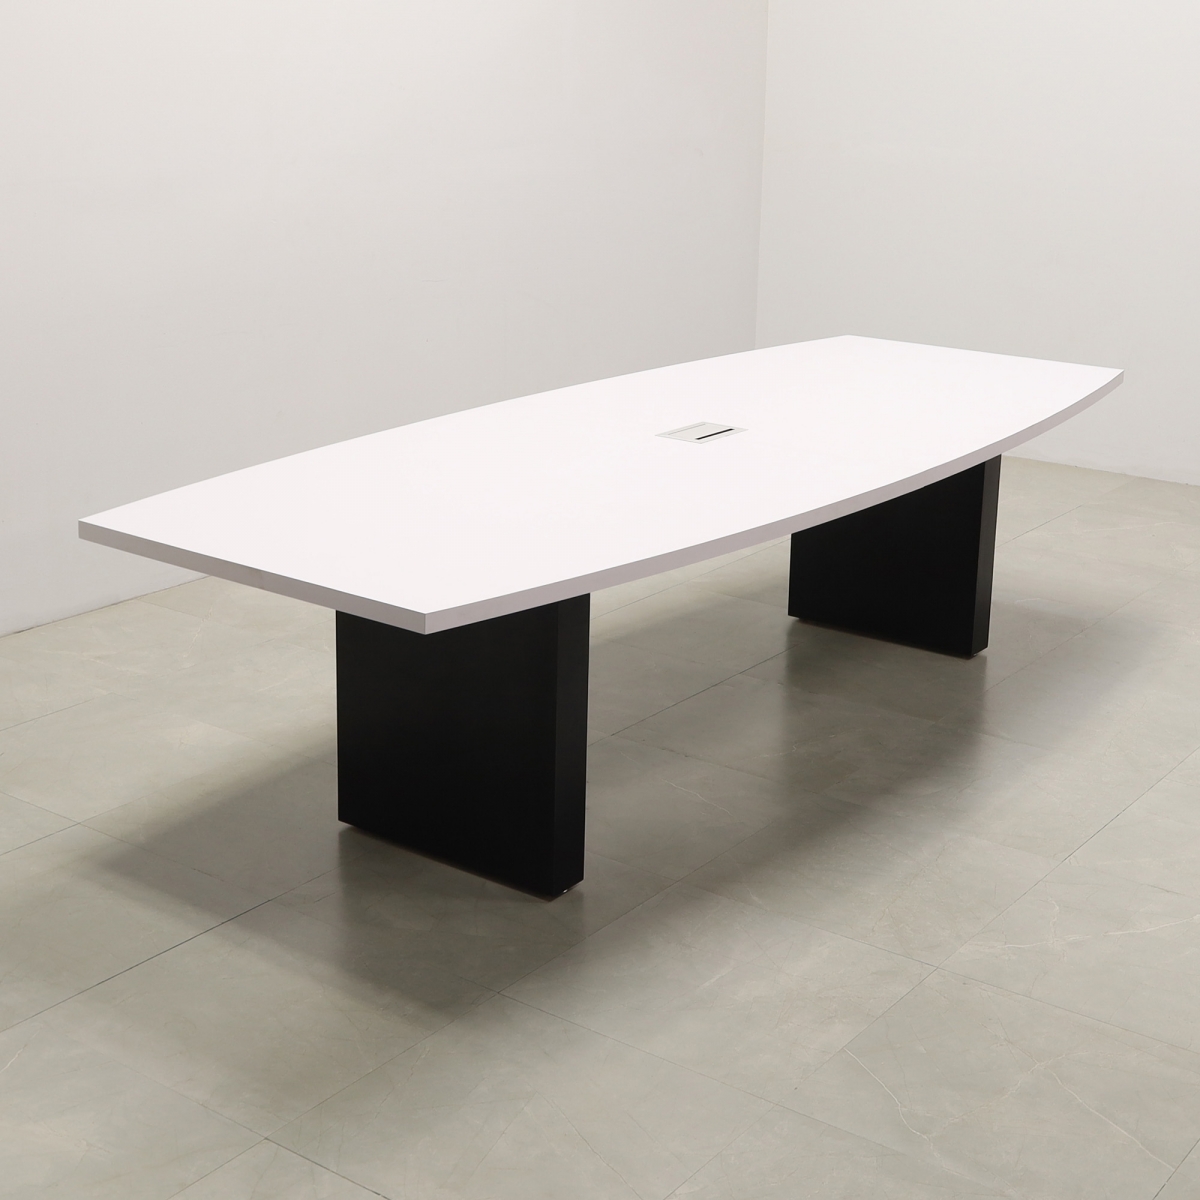 Newton Boat Shaped Conference Table In White Matte Laminate Top - 120 In. - Stock #2